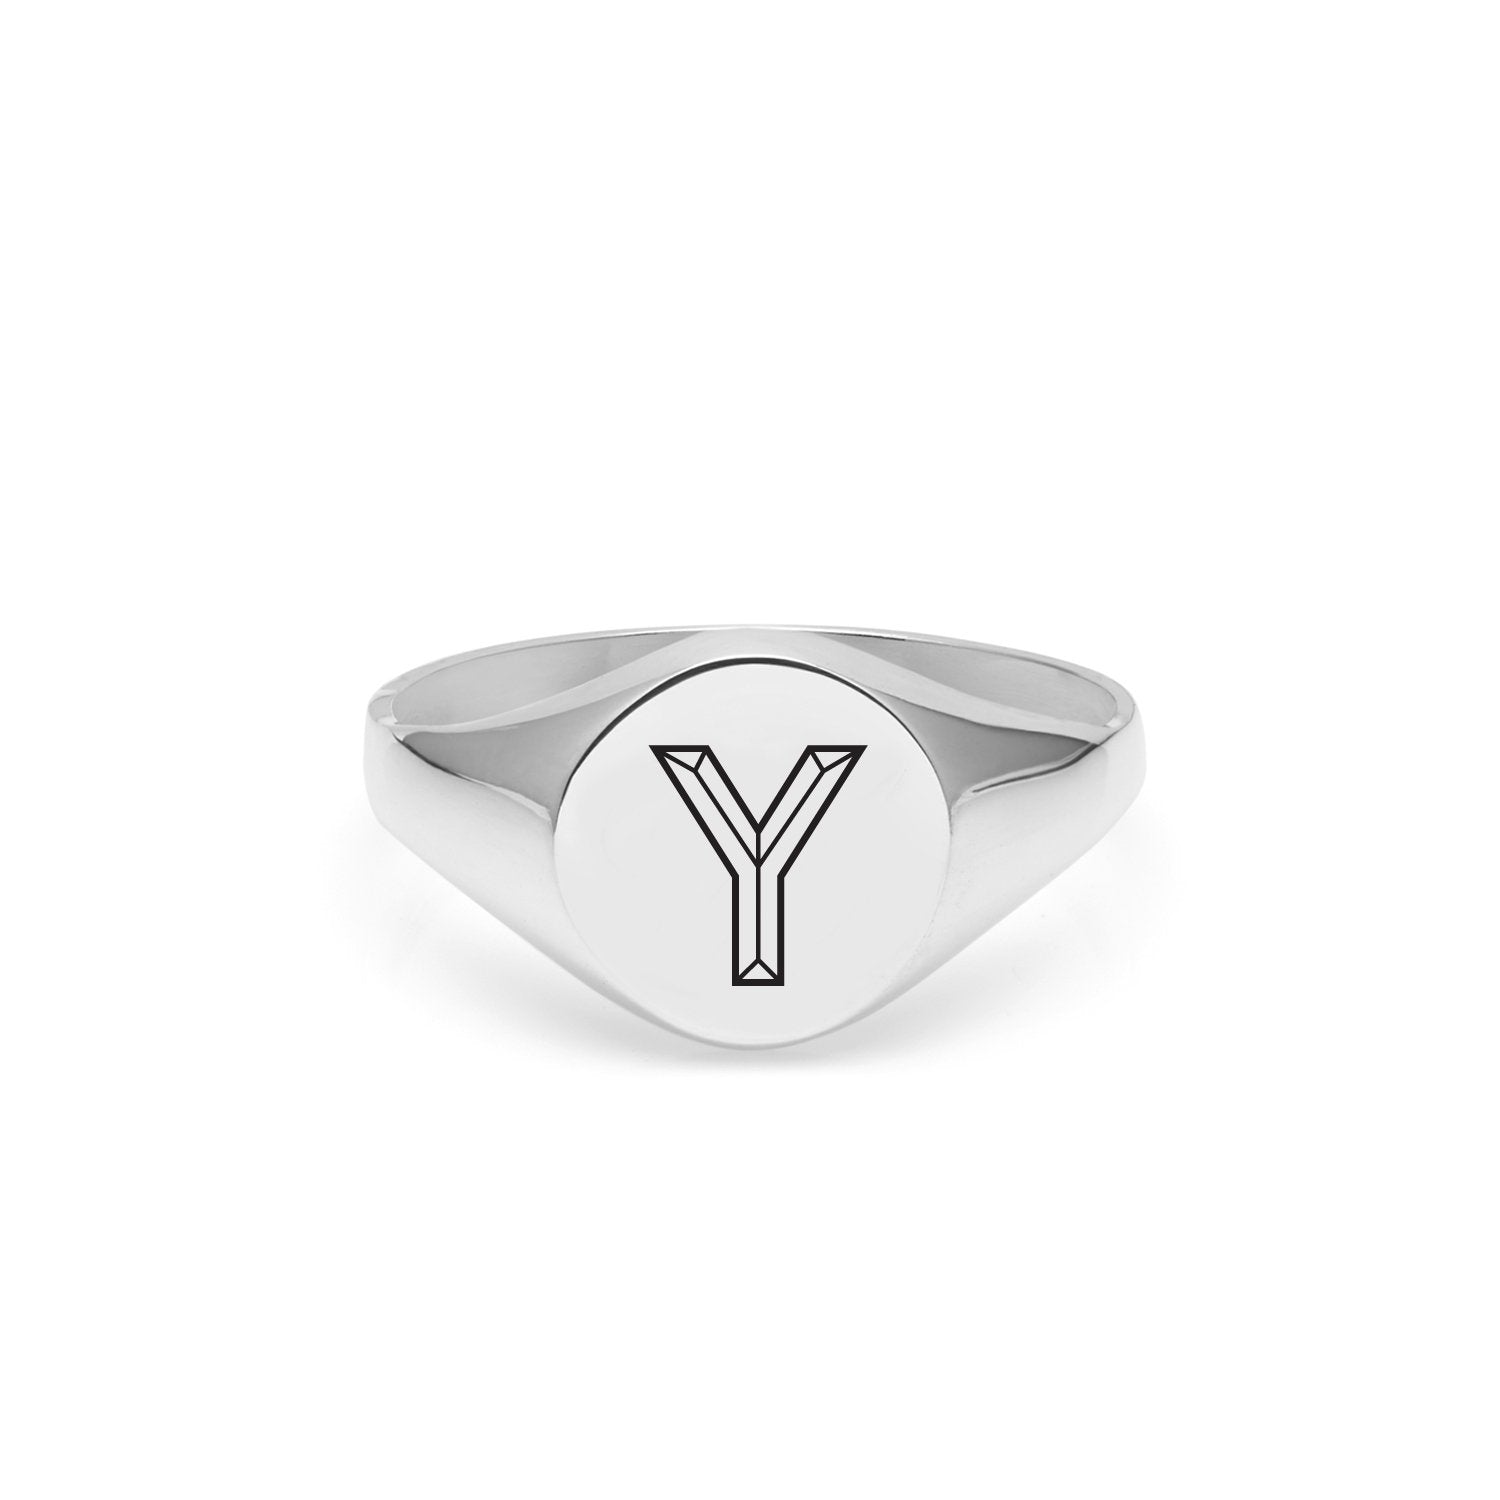 Facett Initial Y Round Signet Ring - Silver - Myia Bonner Jewellery